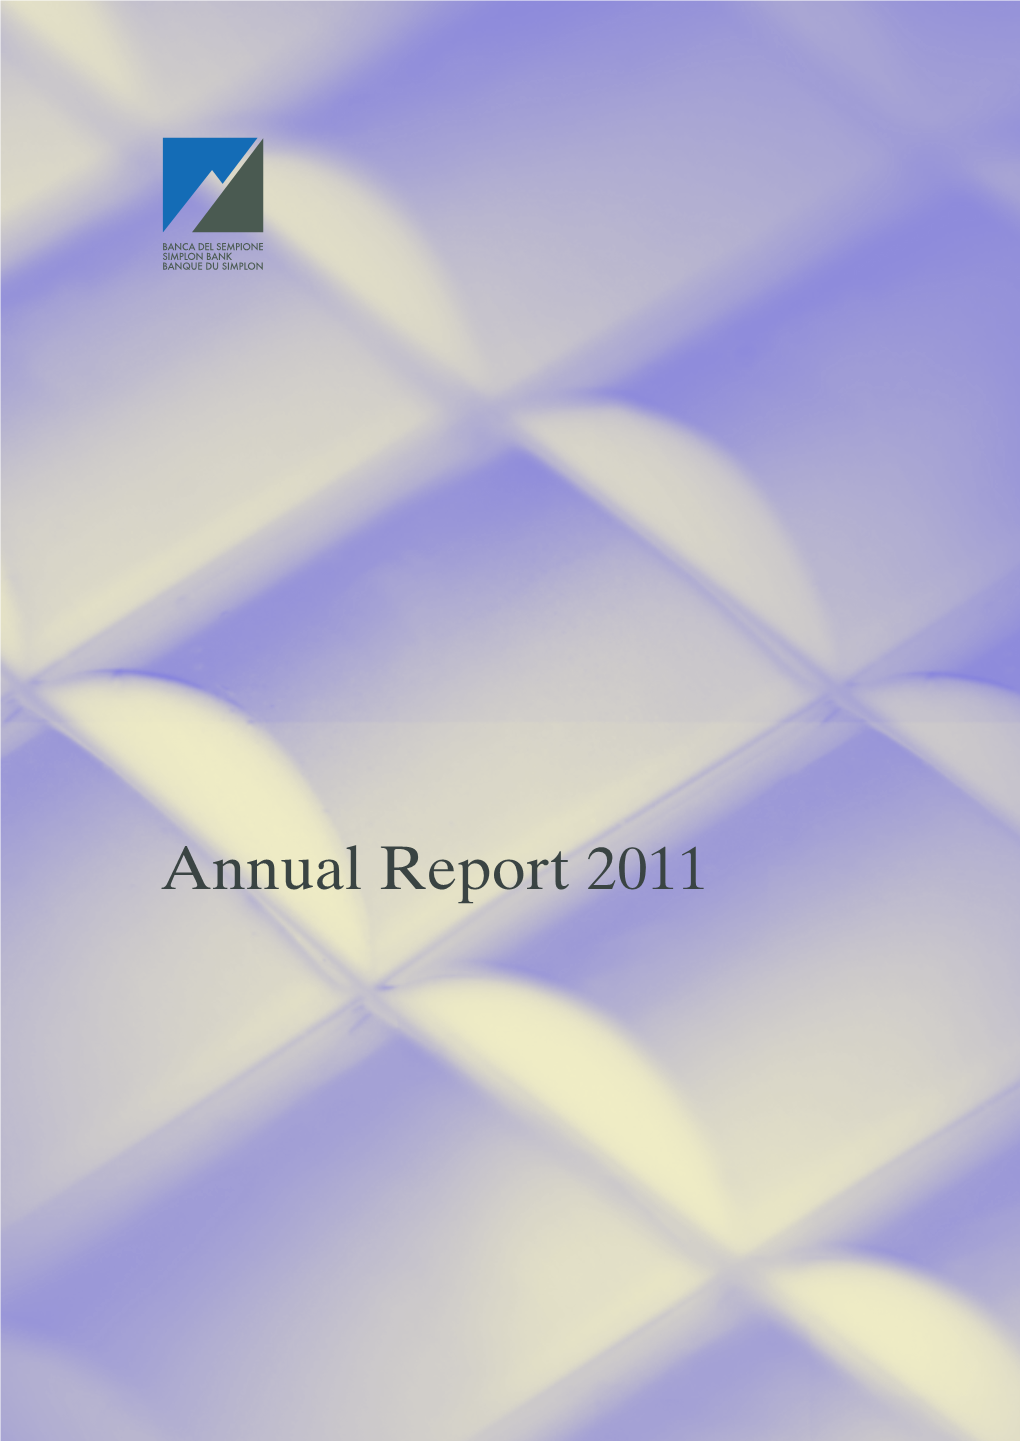 Annual Report 2011 Fax +41 (0)91 743 63 49 BDS-12 01 Relazione 2011 Cop ENG Layout 1 16.04.12 14:20 Pagina 2